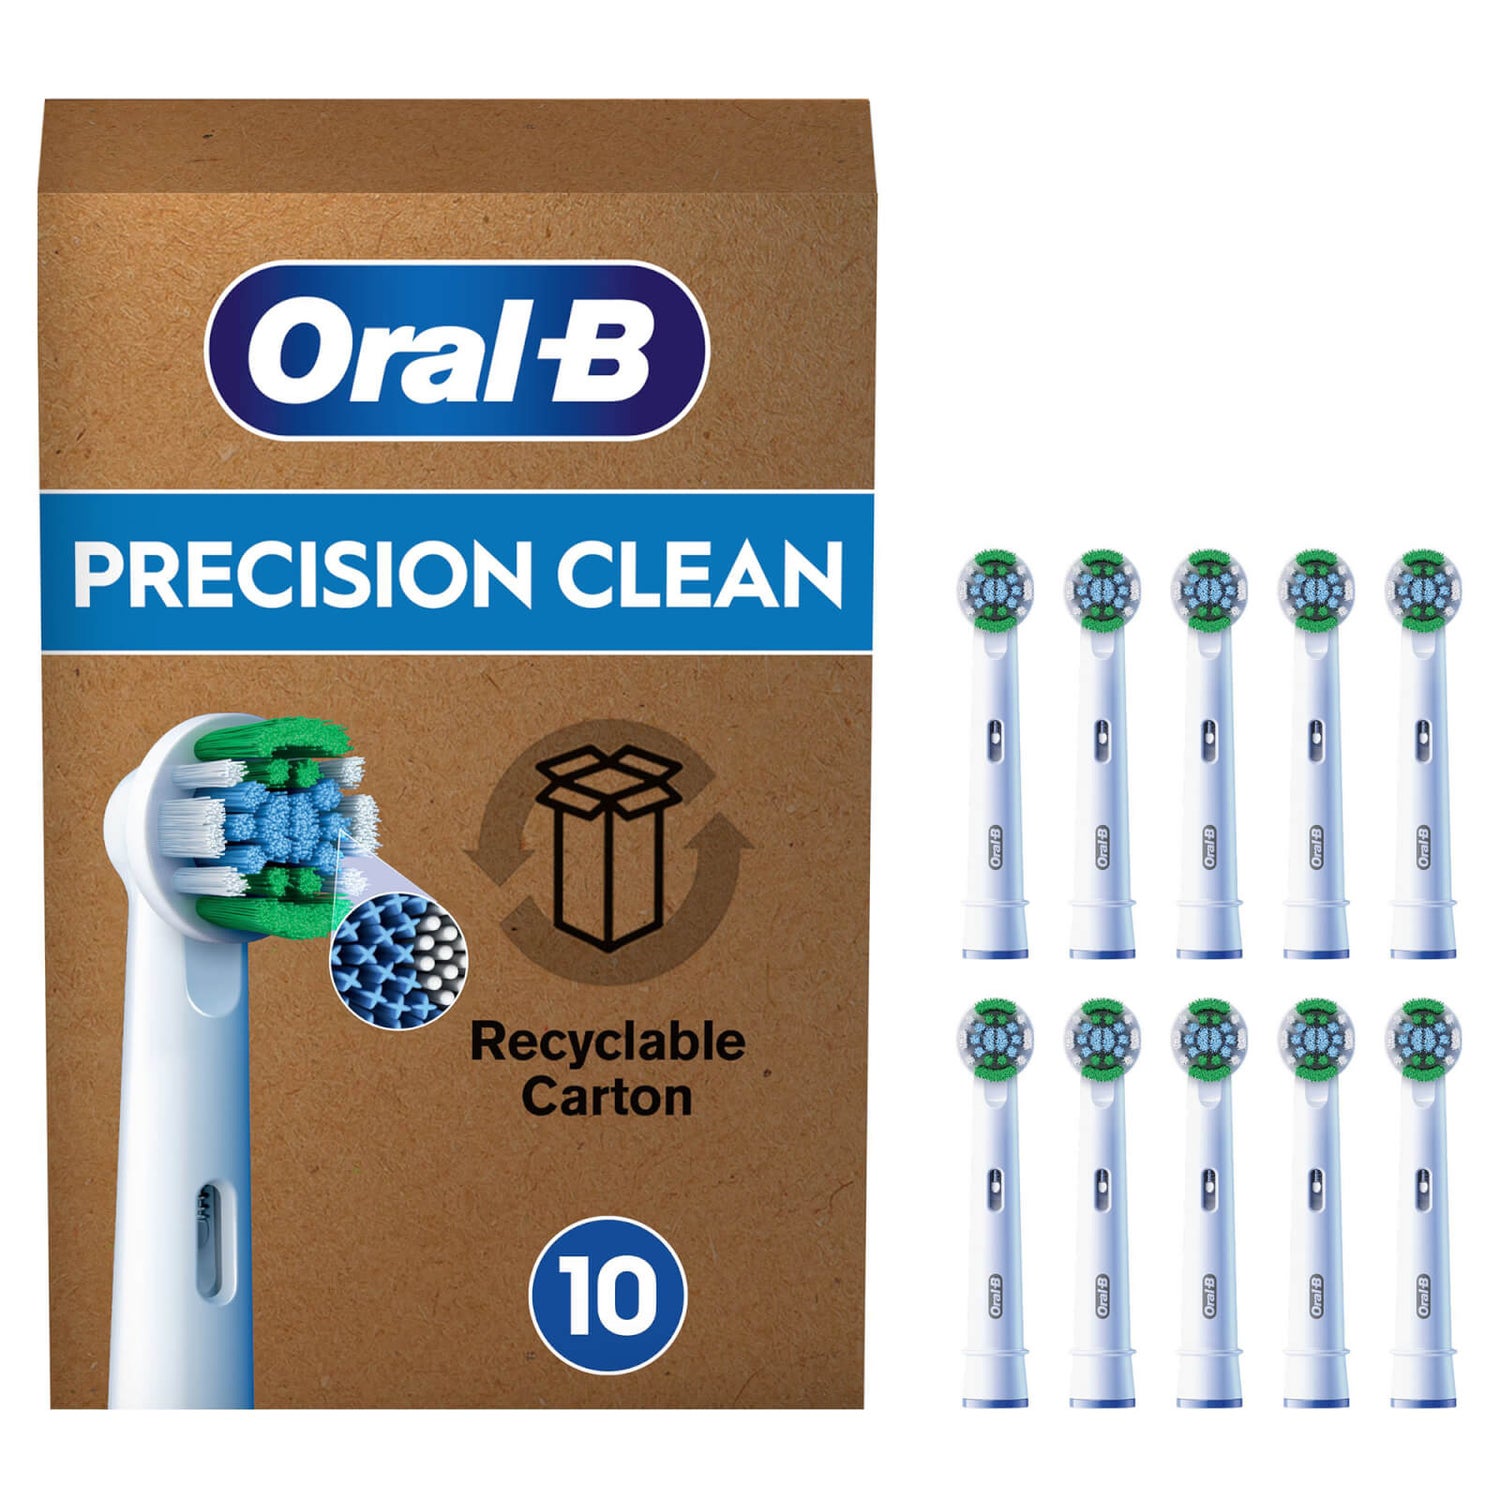 Oral B Precision Clean White Toothbrush Head - Pack of 10 Counts